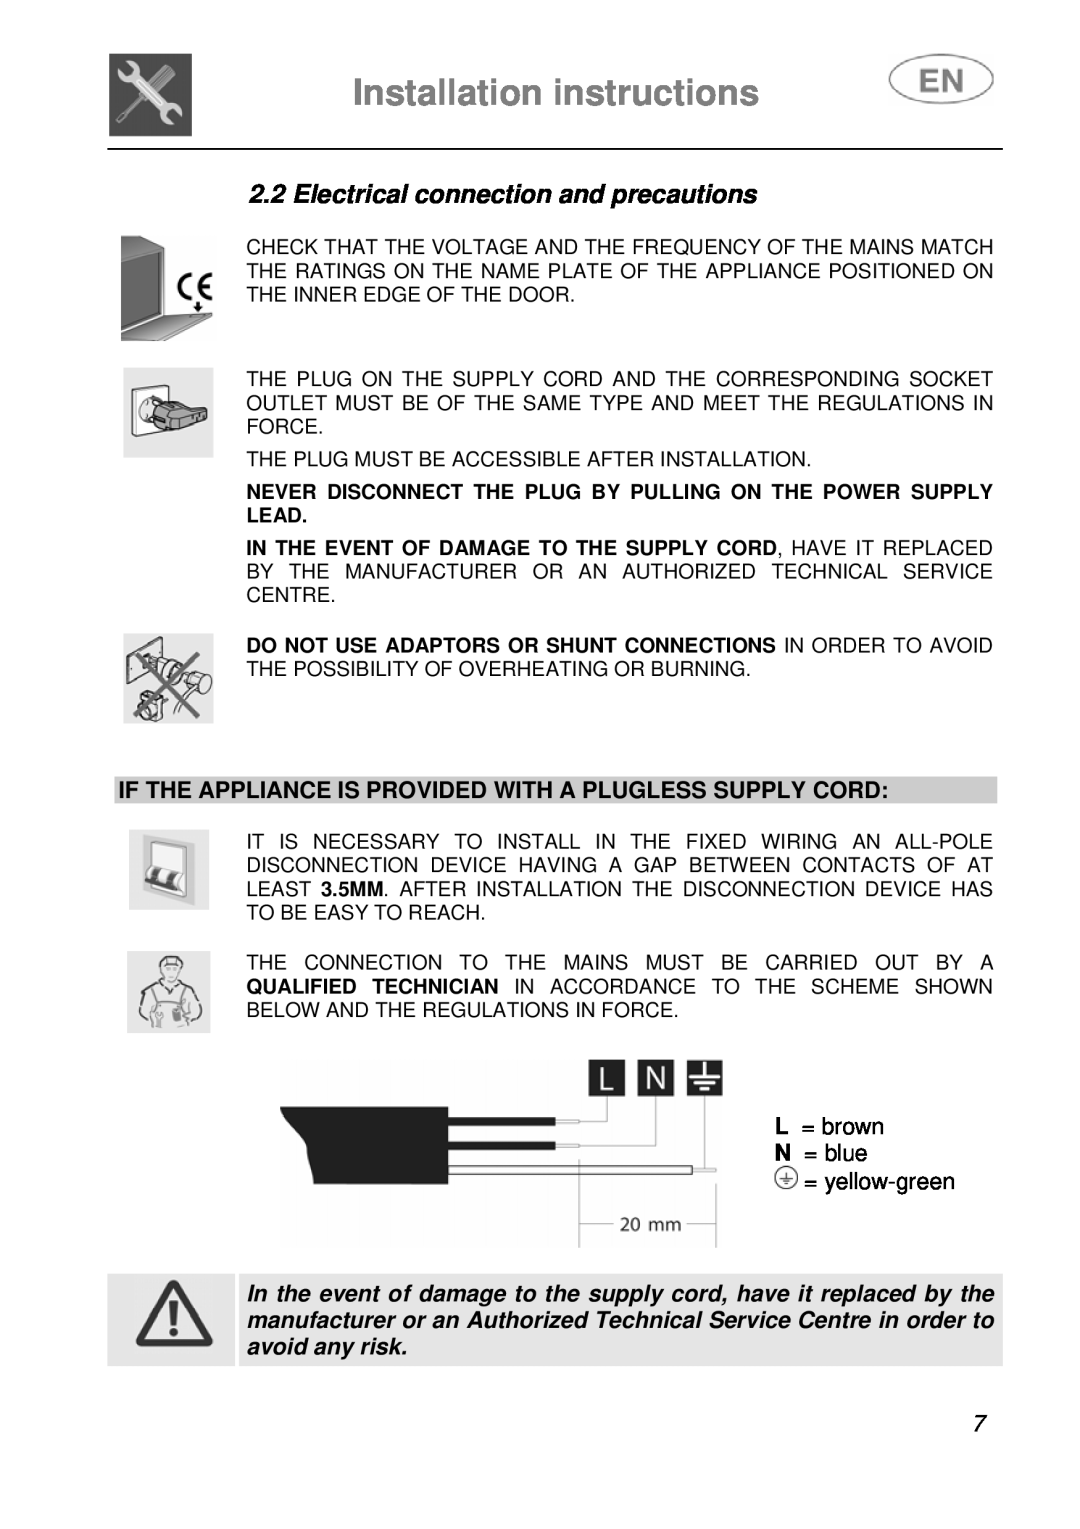 Smeg STA6248, STA6249 instruction manual Installation instructions, Electrical connection and precautions 